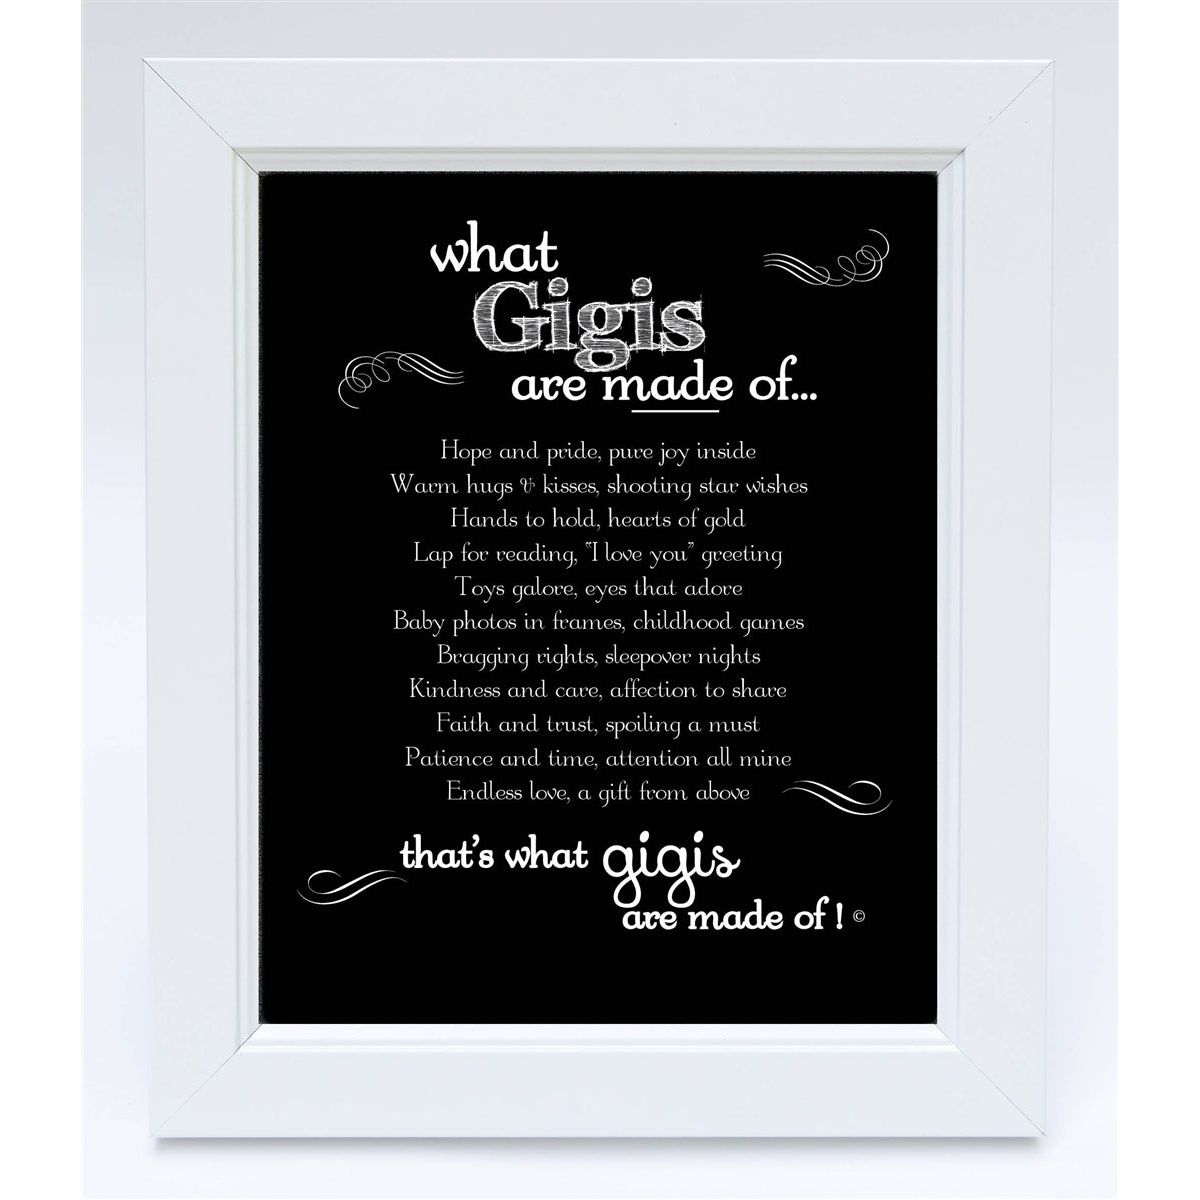 White 8"x10" frame with "What Gigis are Made of..." poem